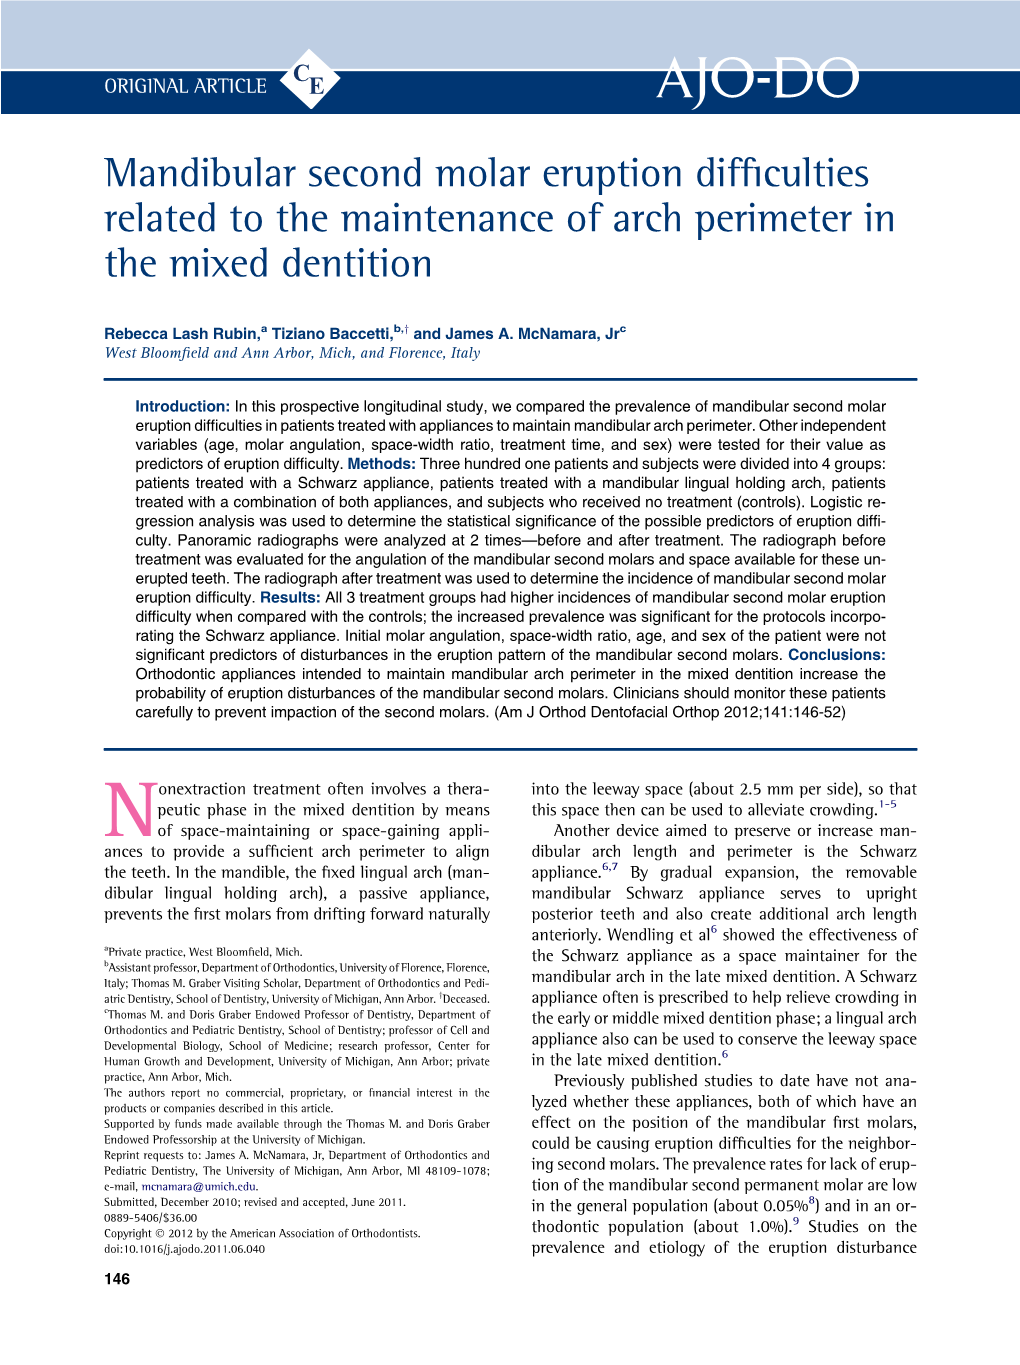 Mandibular Second Molar Eruption Difficulties Related to the Maintenance of Arch Perimeter in the Mixed Dentition